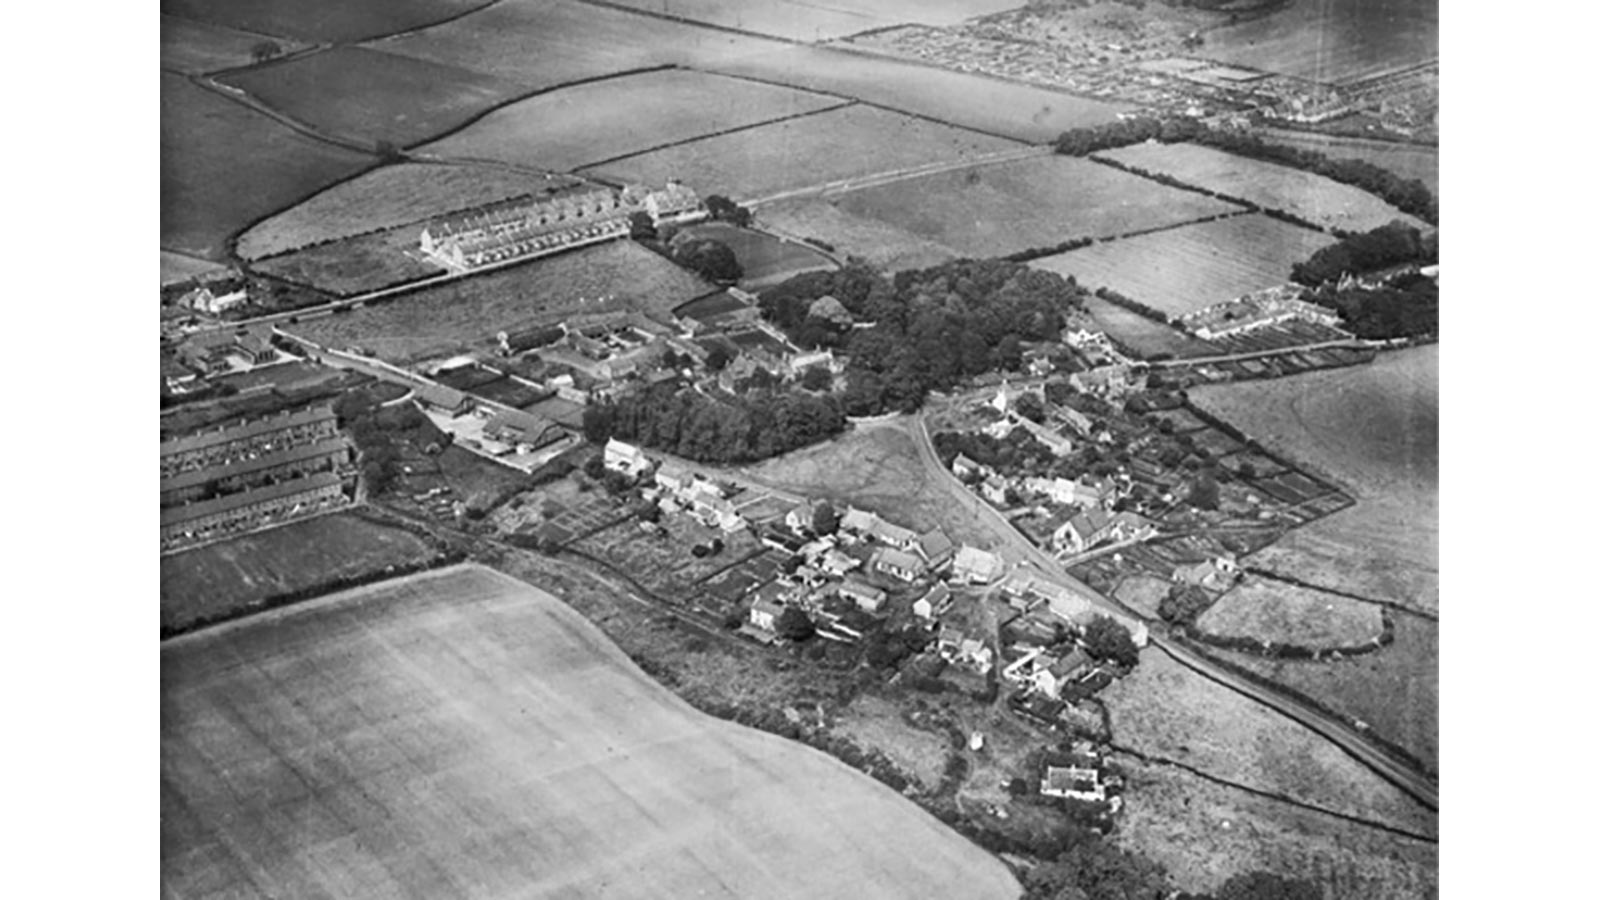 image of Walbottle Village - 1948 (britainfromabove.org.uk)